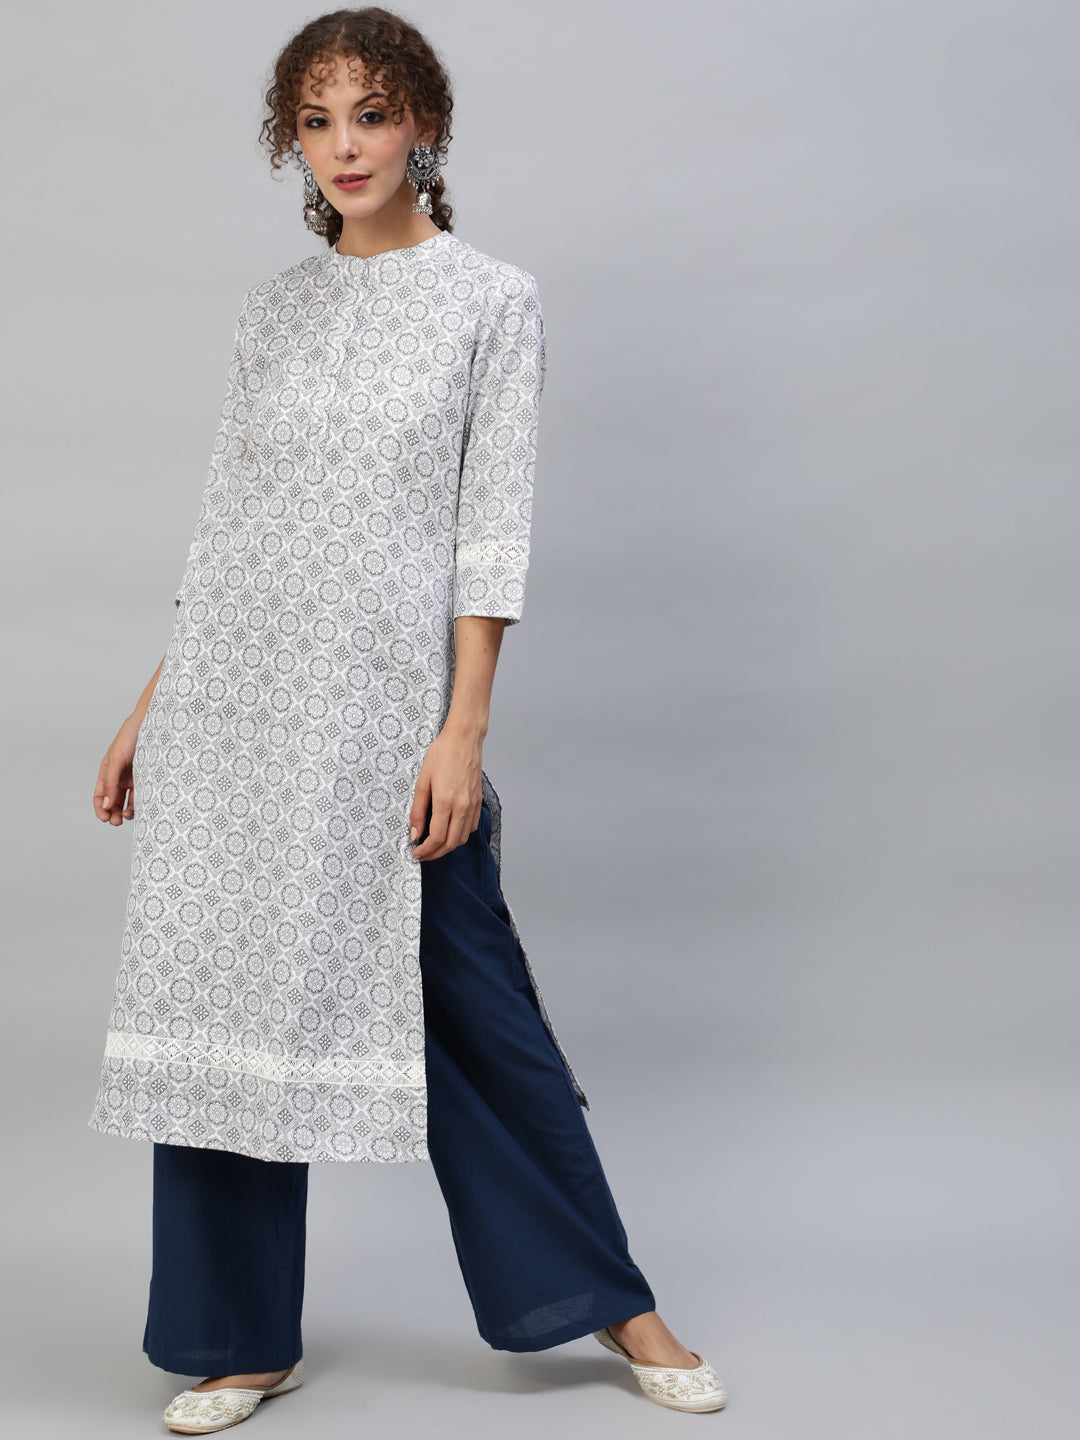 White & Grey Floral Printed Straight Kurta With Lace Details